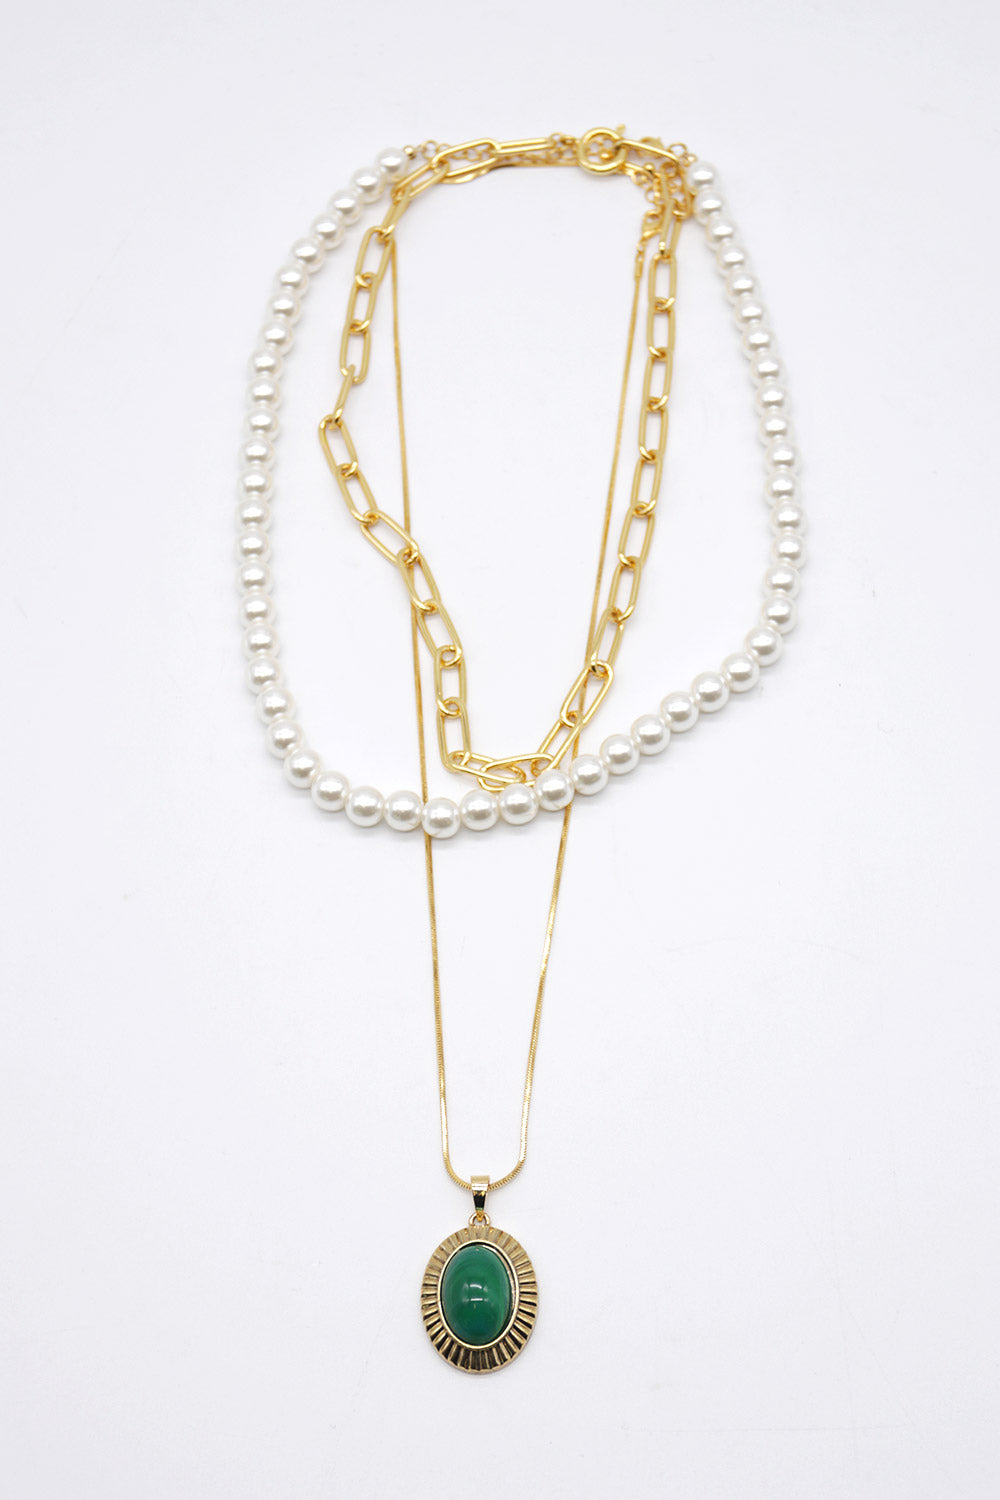 storets.com Aerin Pearl Chain Layered Necklace